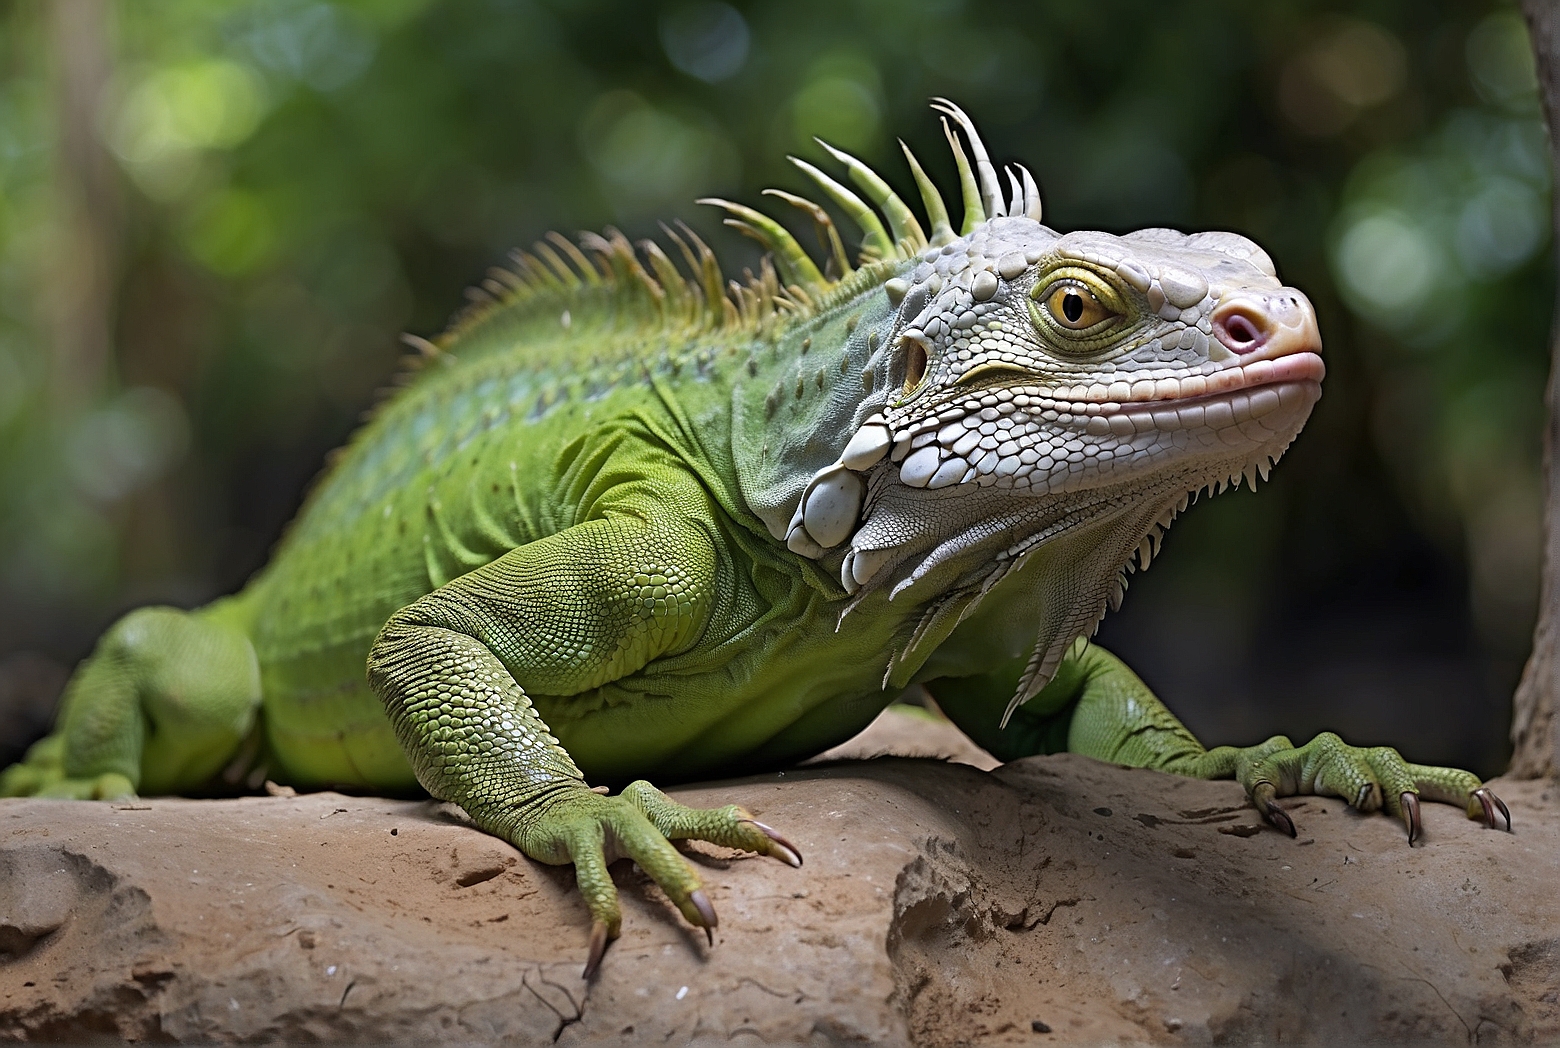 How Long Can a Green Iguana Survive Without Eating